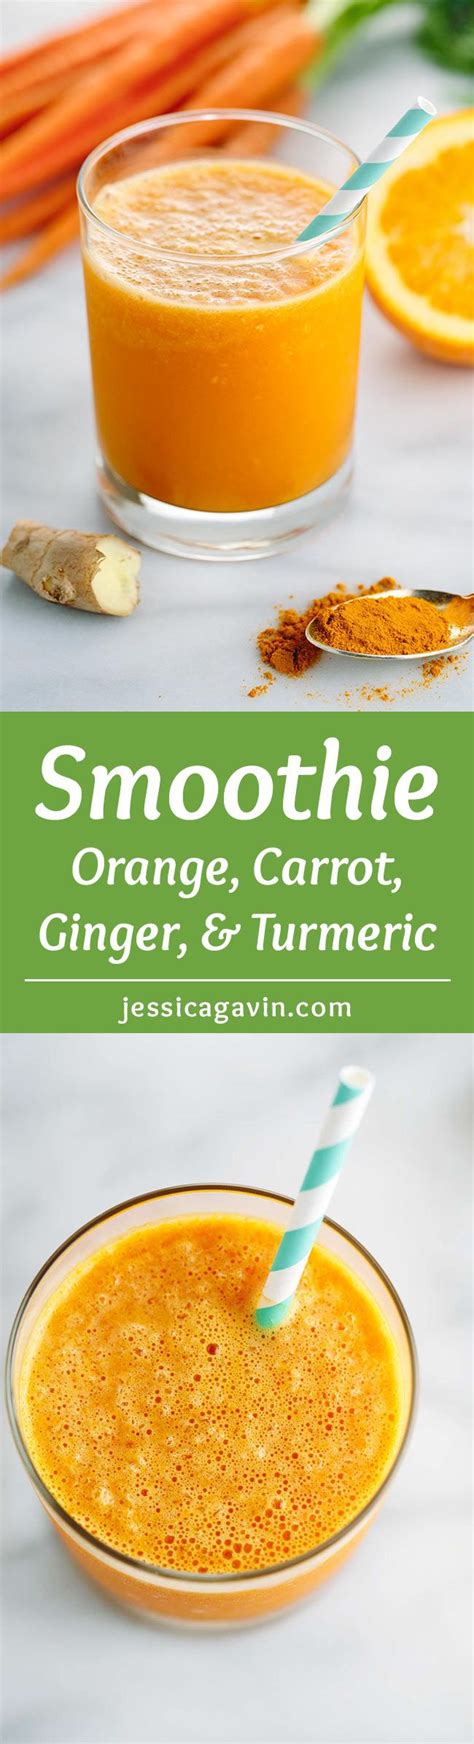 Carrot Ginger Smoothie With Turmeric Recipe Turmeric Recipes